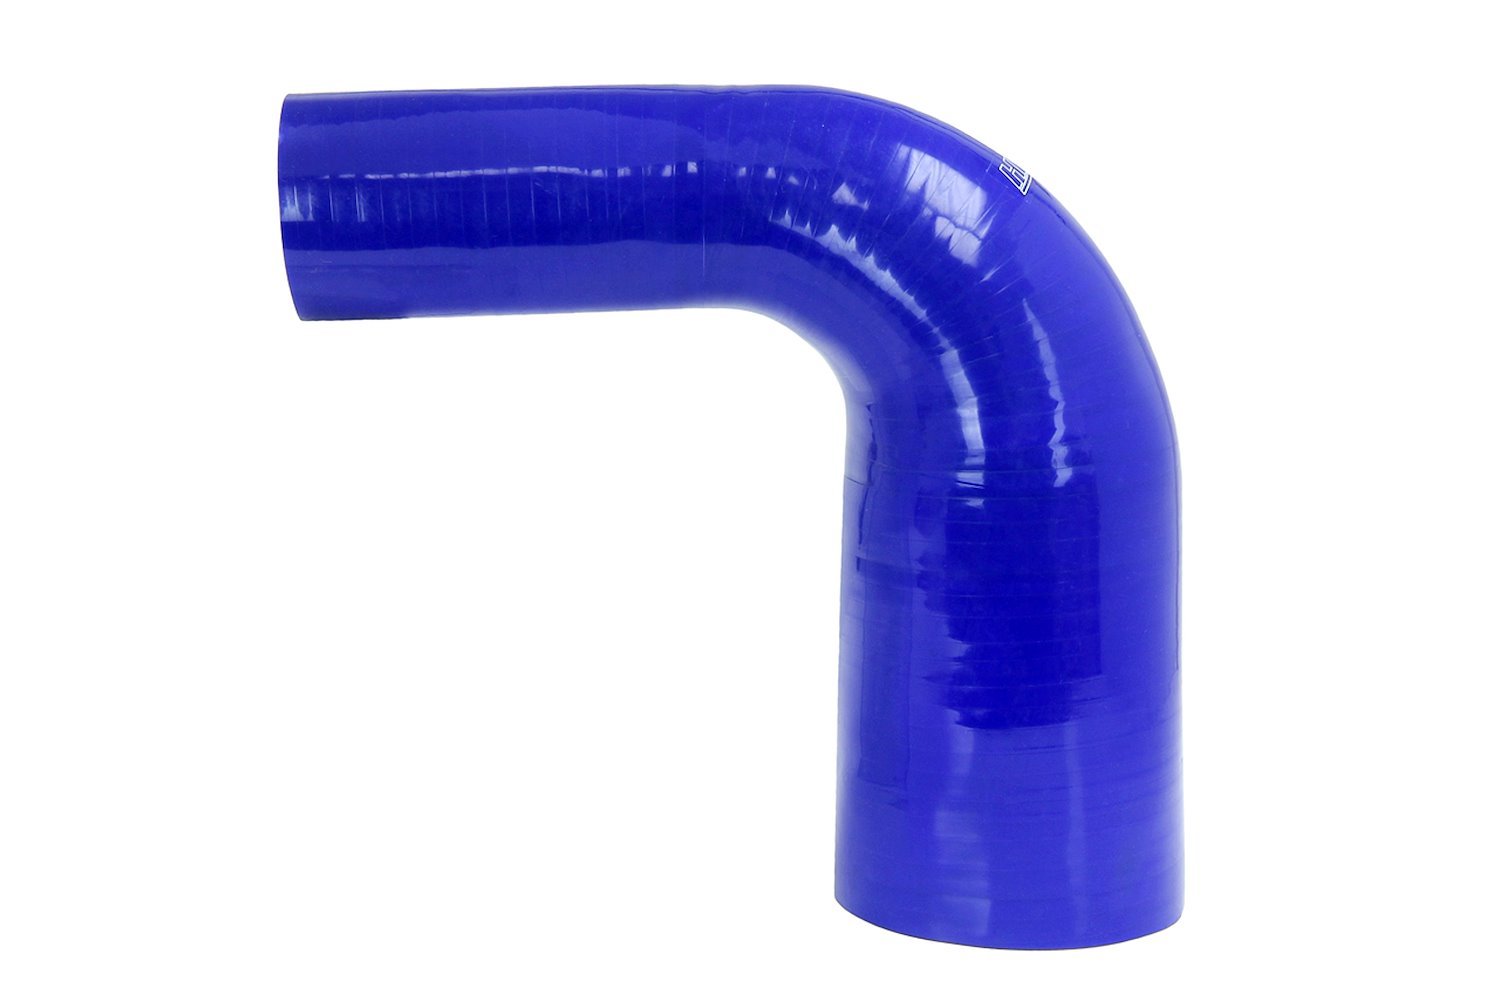 HTSER90-225-300-BLUE Silicone 90-Degree Elbow Hose, High-Temp 4-Ply Reinforced, 2-1/4 in. - 3 in. ID, Blue